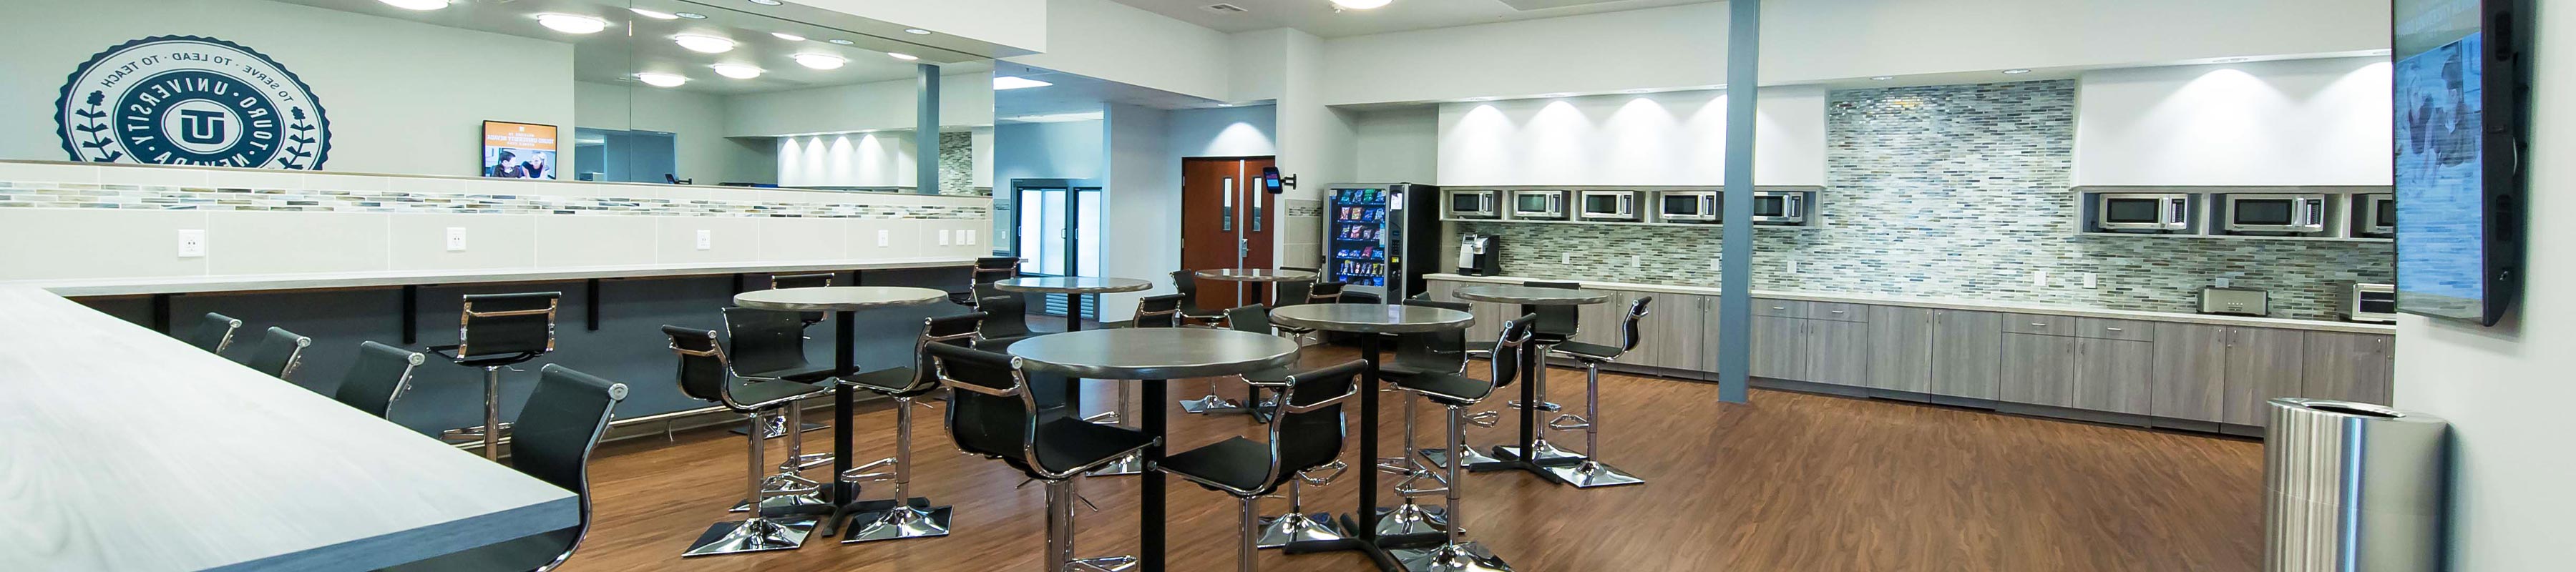 Student Common Area with tables, chairs, and food prep area with vending machine and microwave.